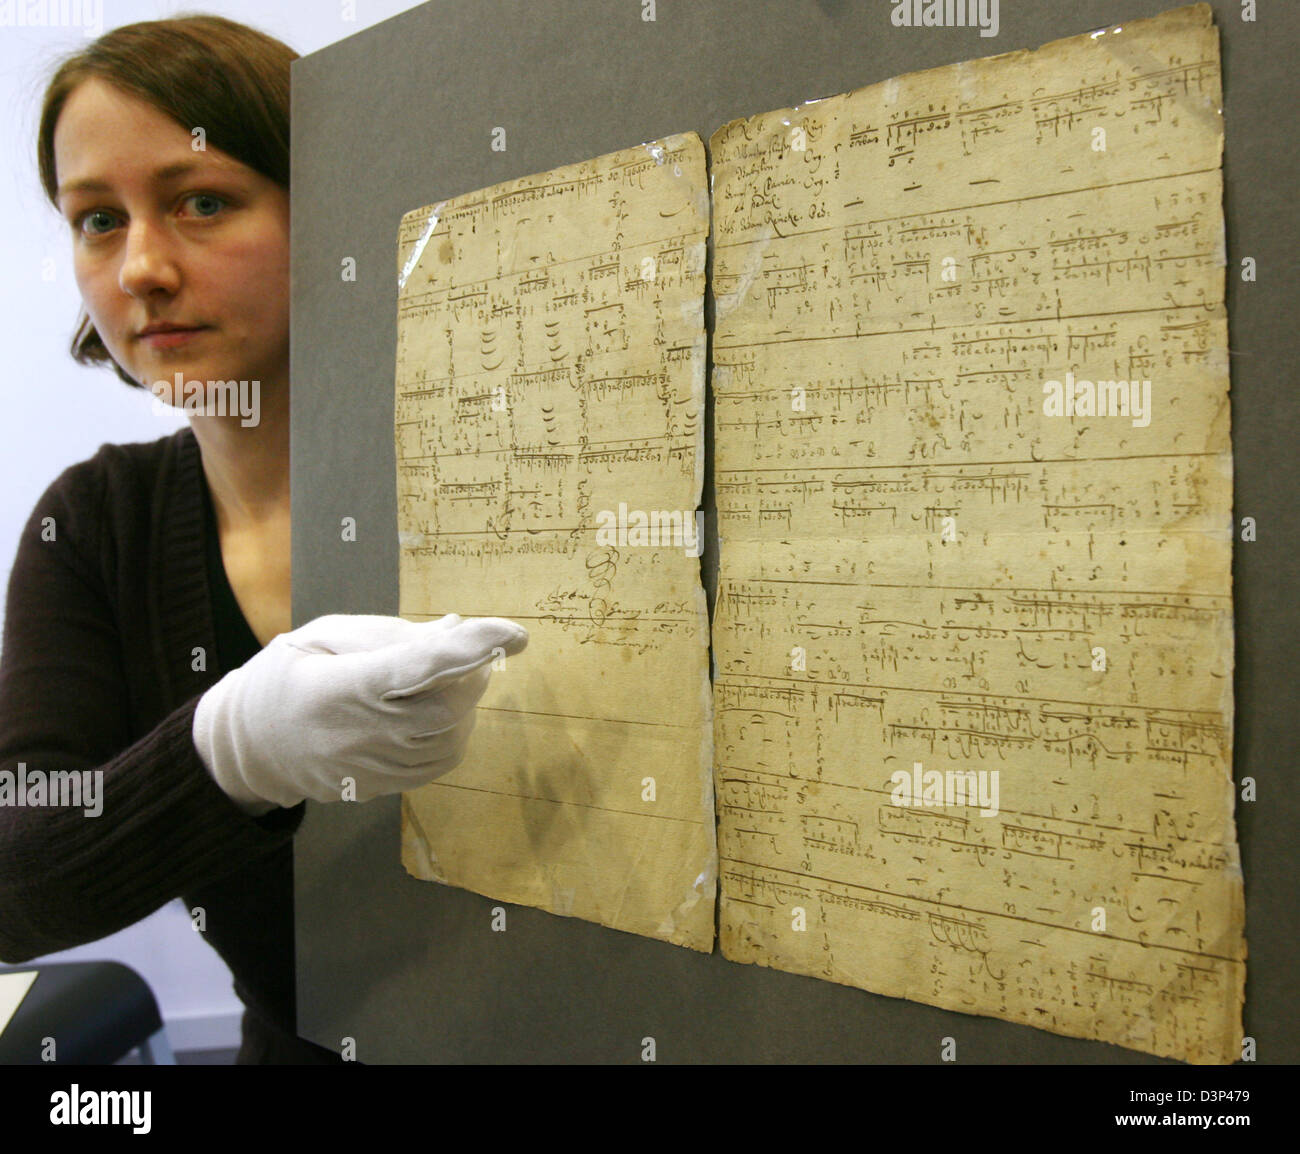 Paper restorer Nanett Woithe presents a hand written text by Johann  Sebastian Bach dated around 1700 in Weimar, Germany, Thursday, 31 August  2006. It is one of the earliest writings of Bach